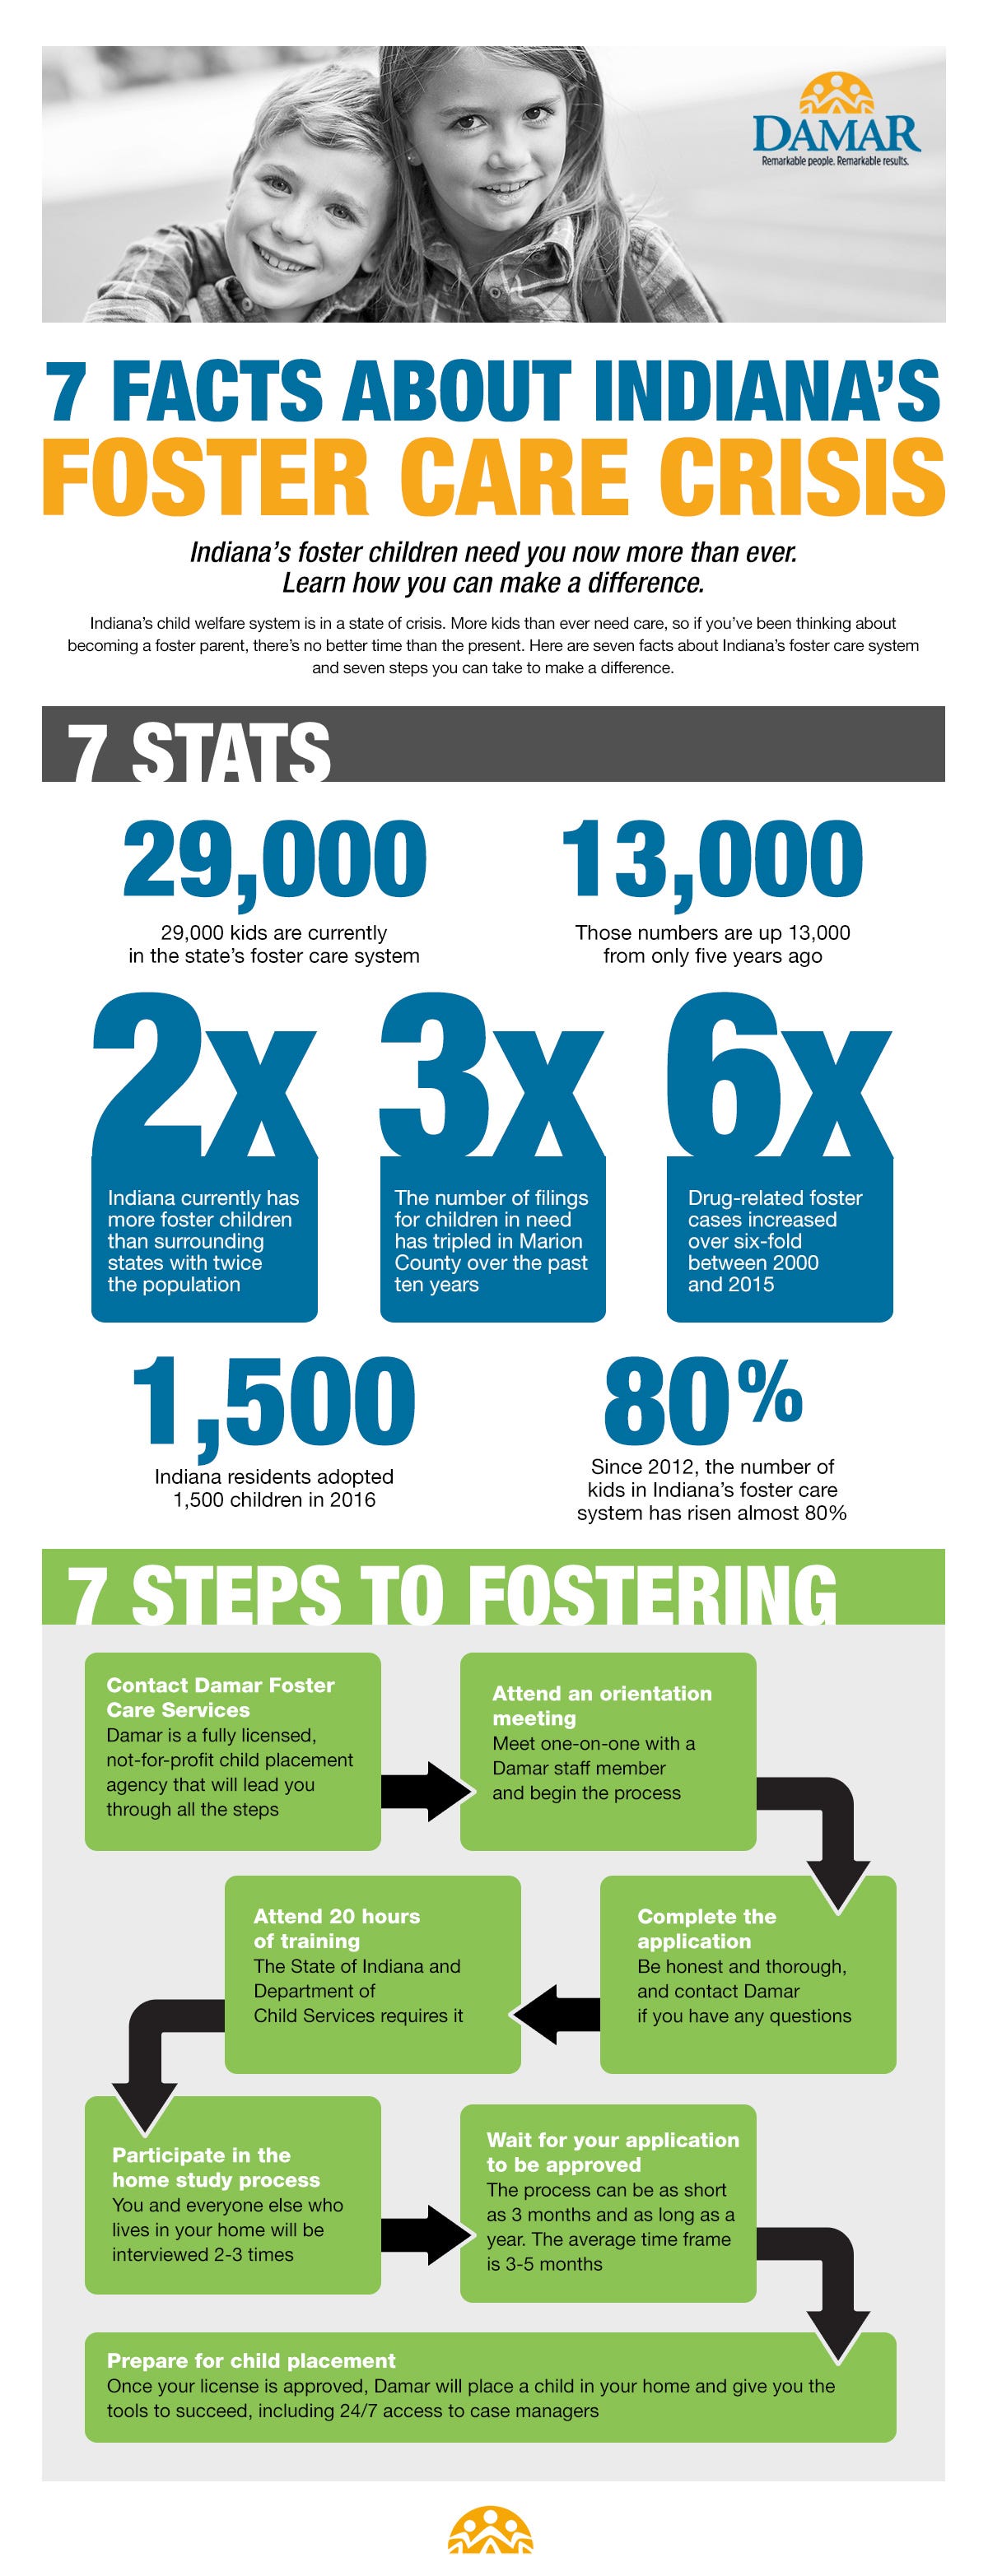 7 Facts aAbout Indiana's Foster Care Crisis